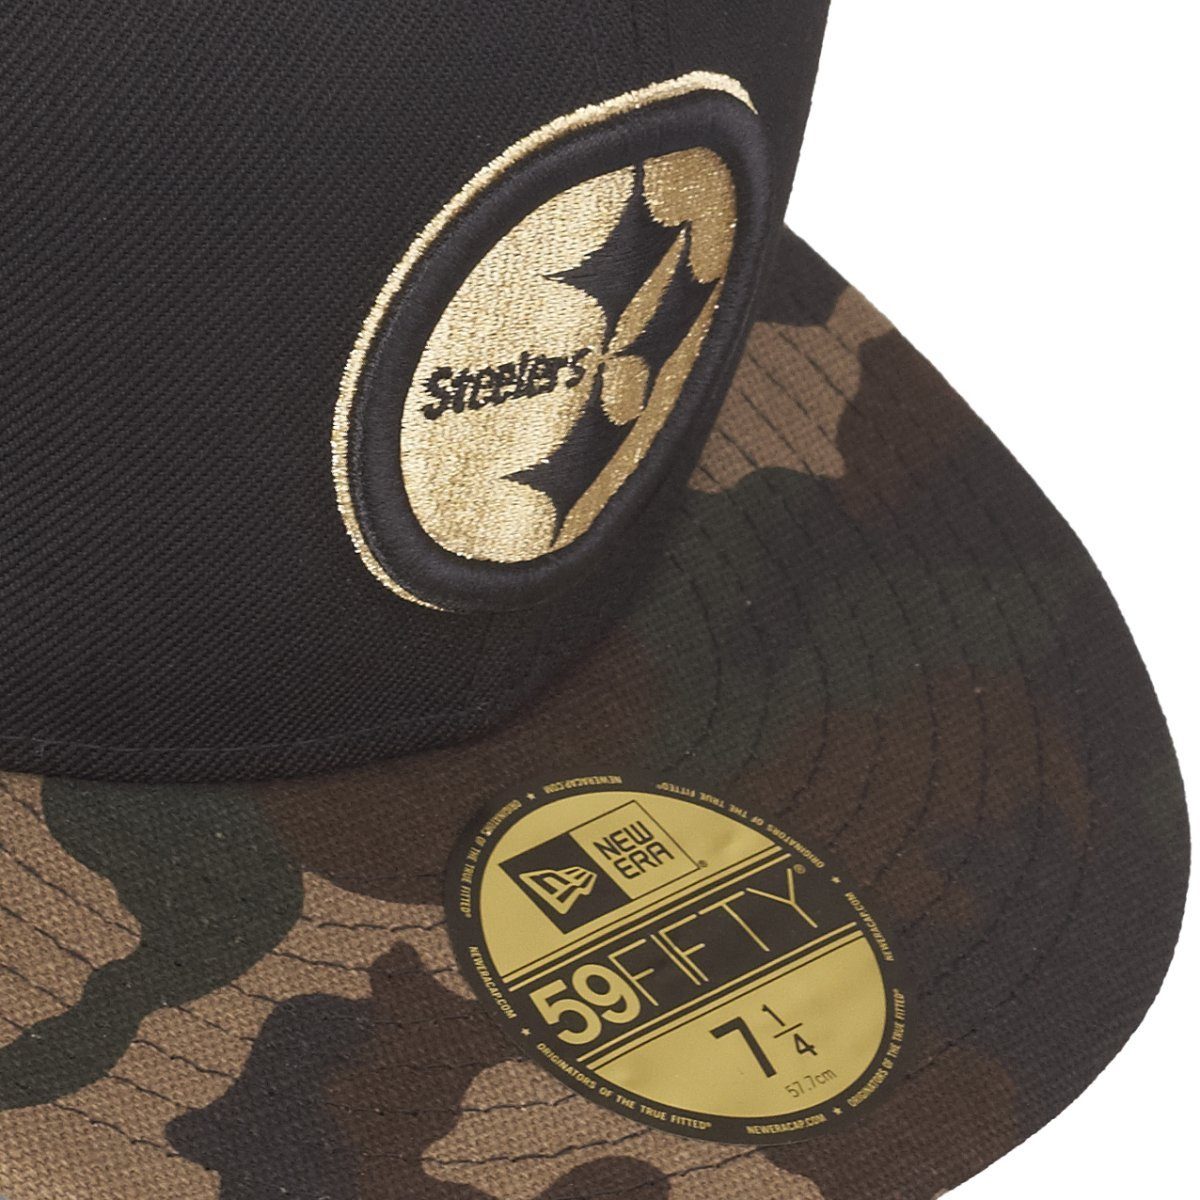 Steelers Fitted Era Pittsburgh GOLD Cap New 59Fifty